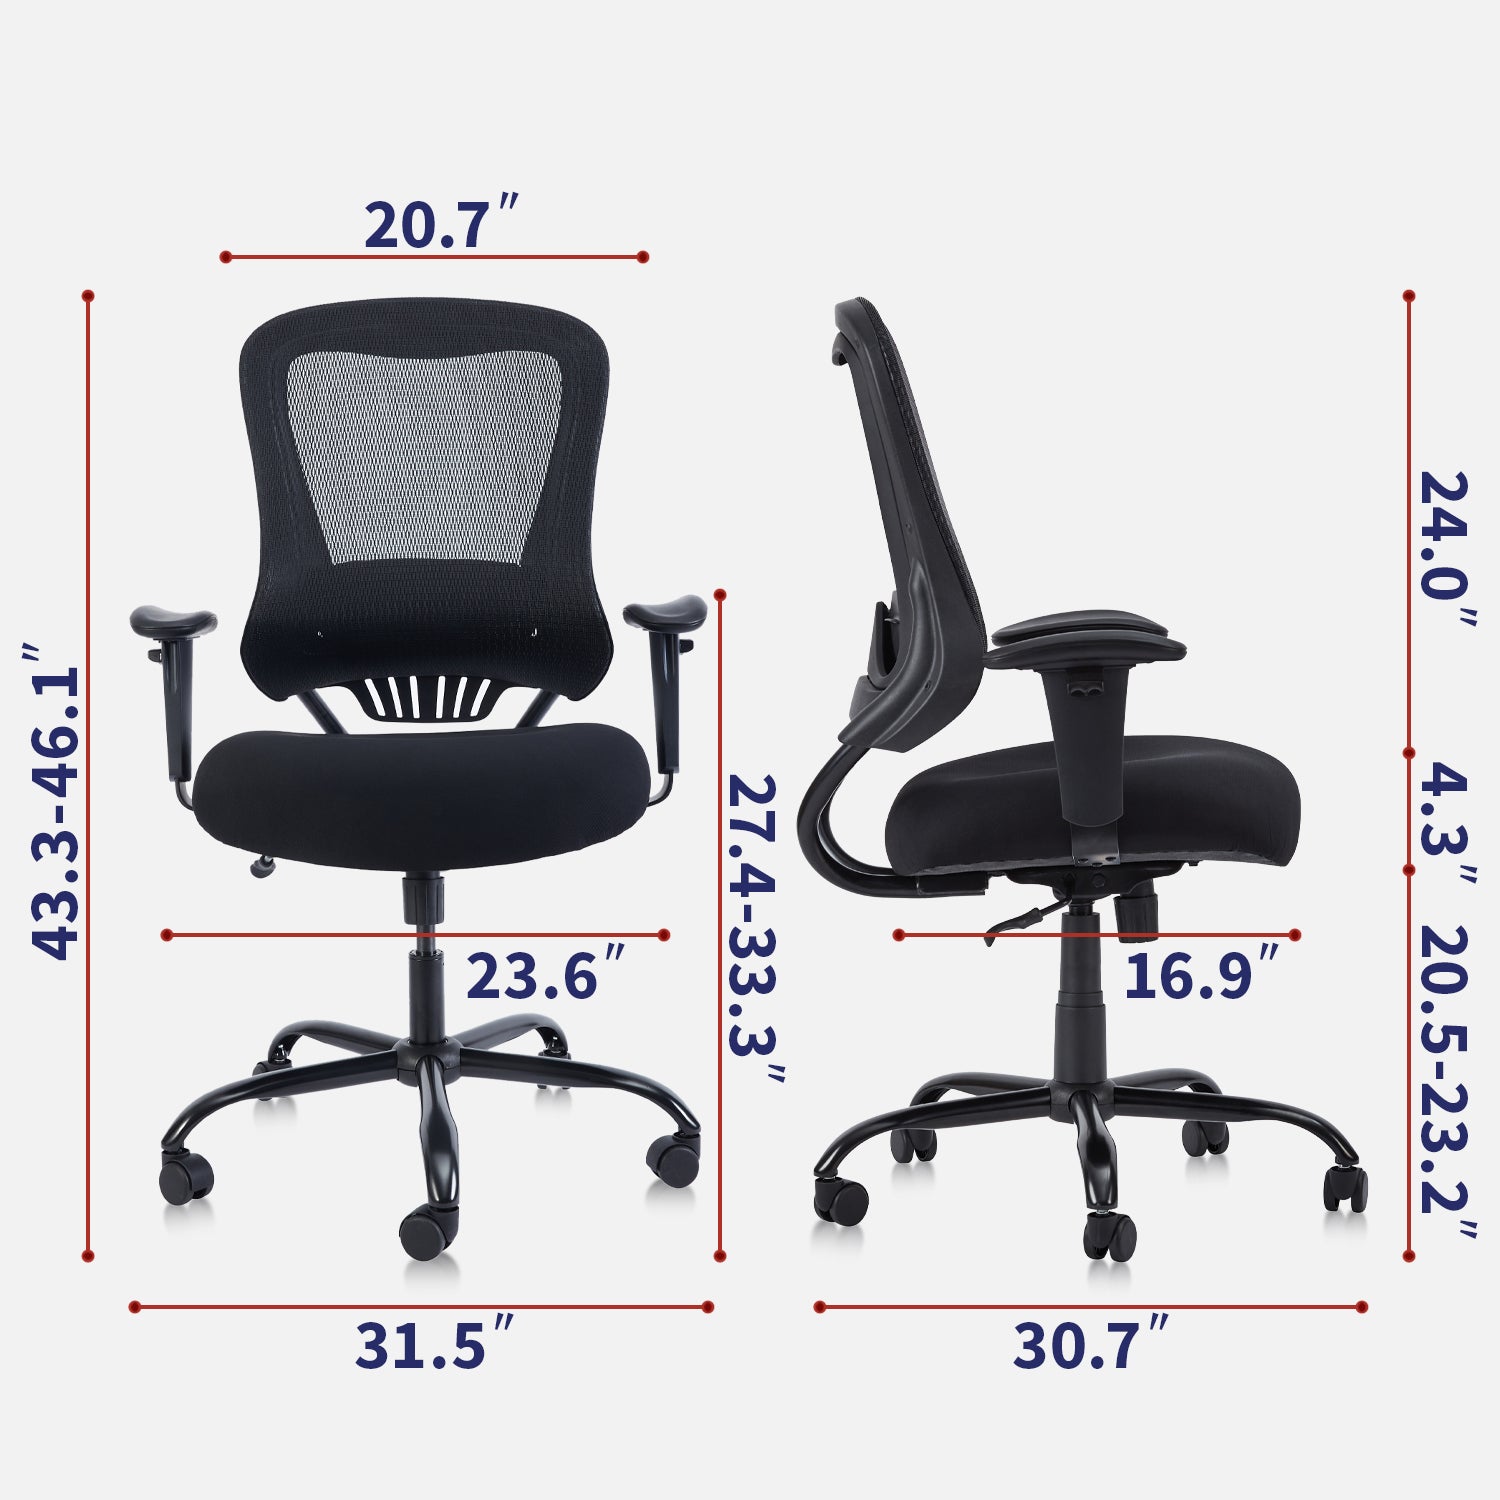 CLATINA Big and Tall Executive Chair with 350lbs High Capacity and Thick Seat Cushion for Home Office Black BIFMA Certification X5.1 (1 Pack)